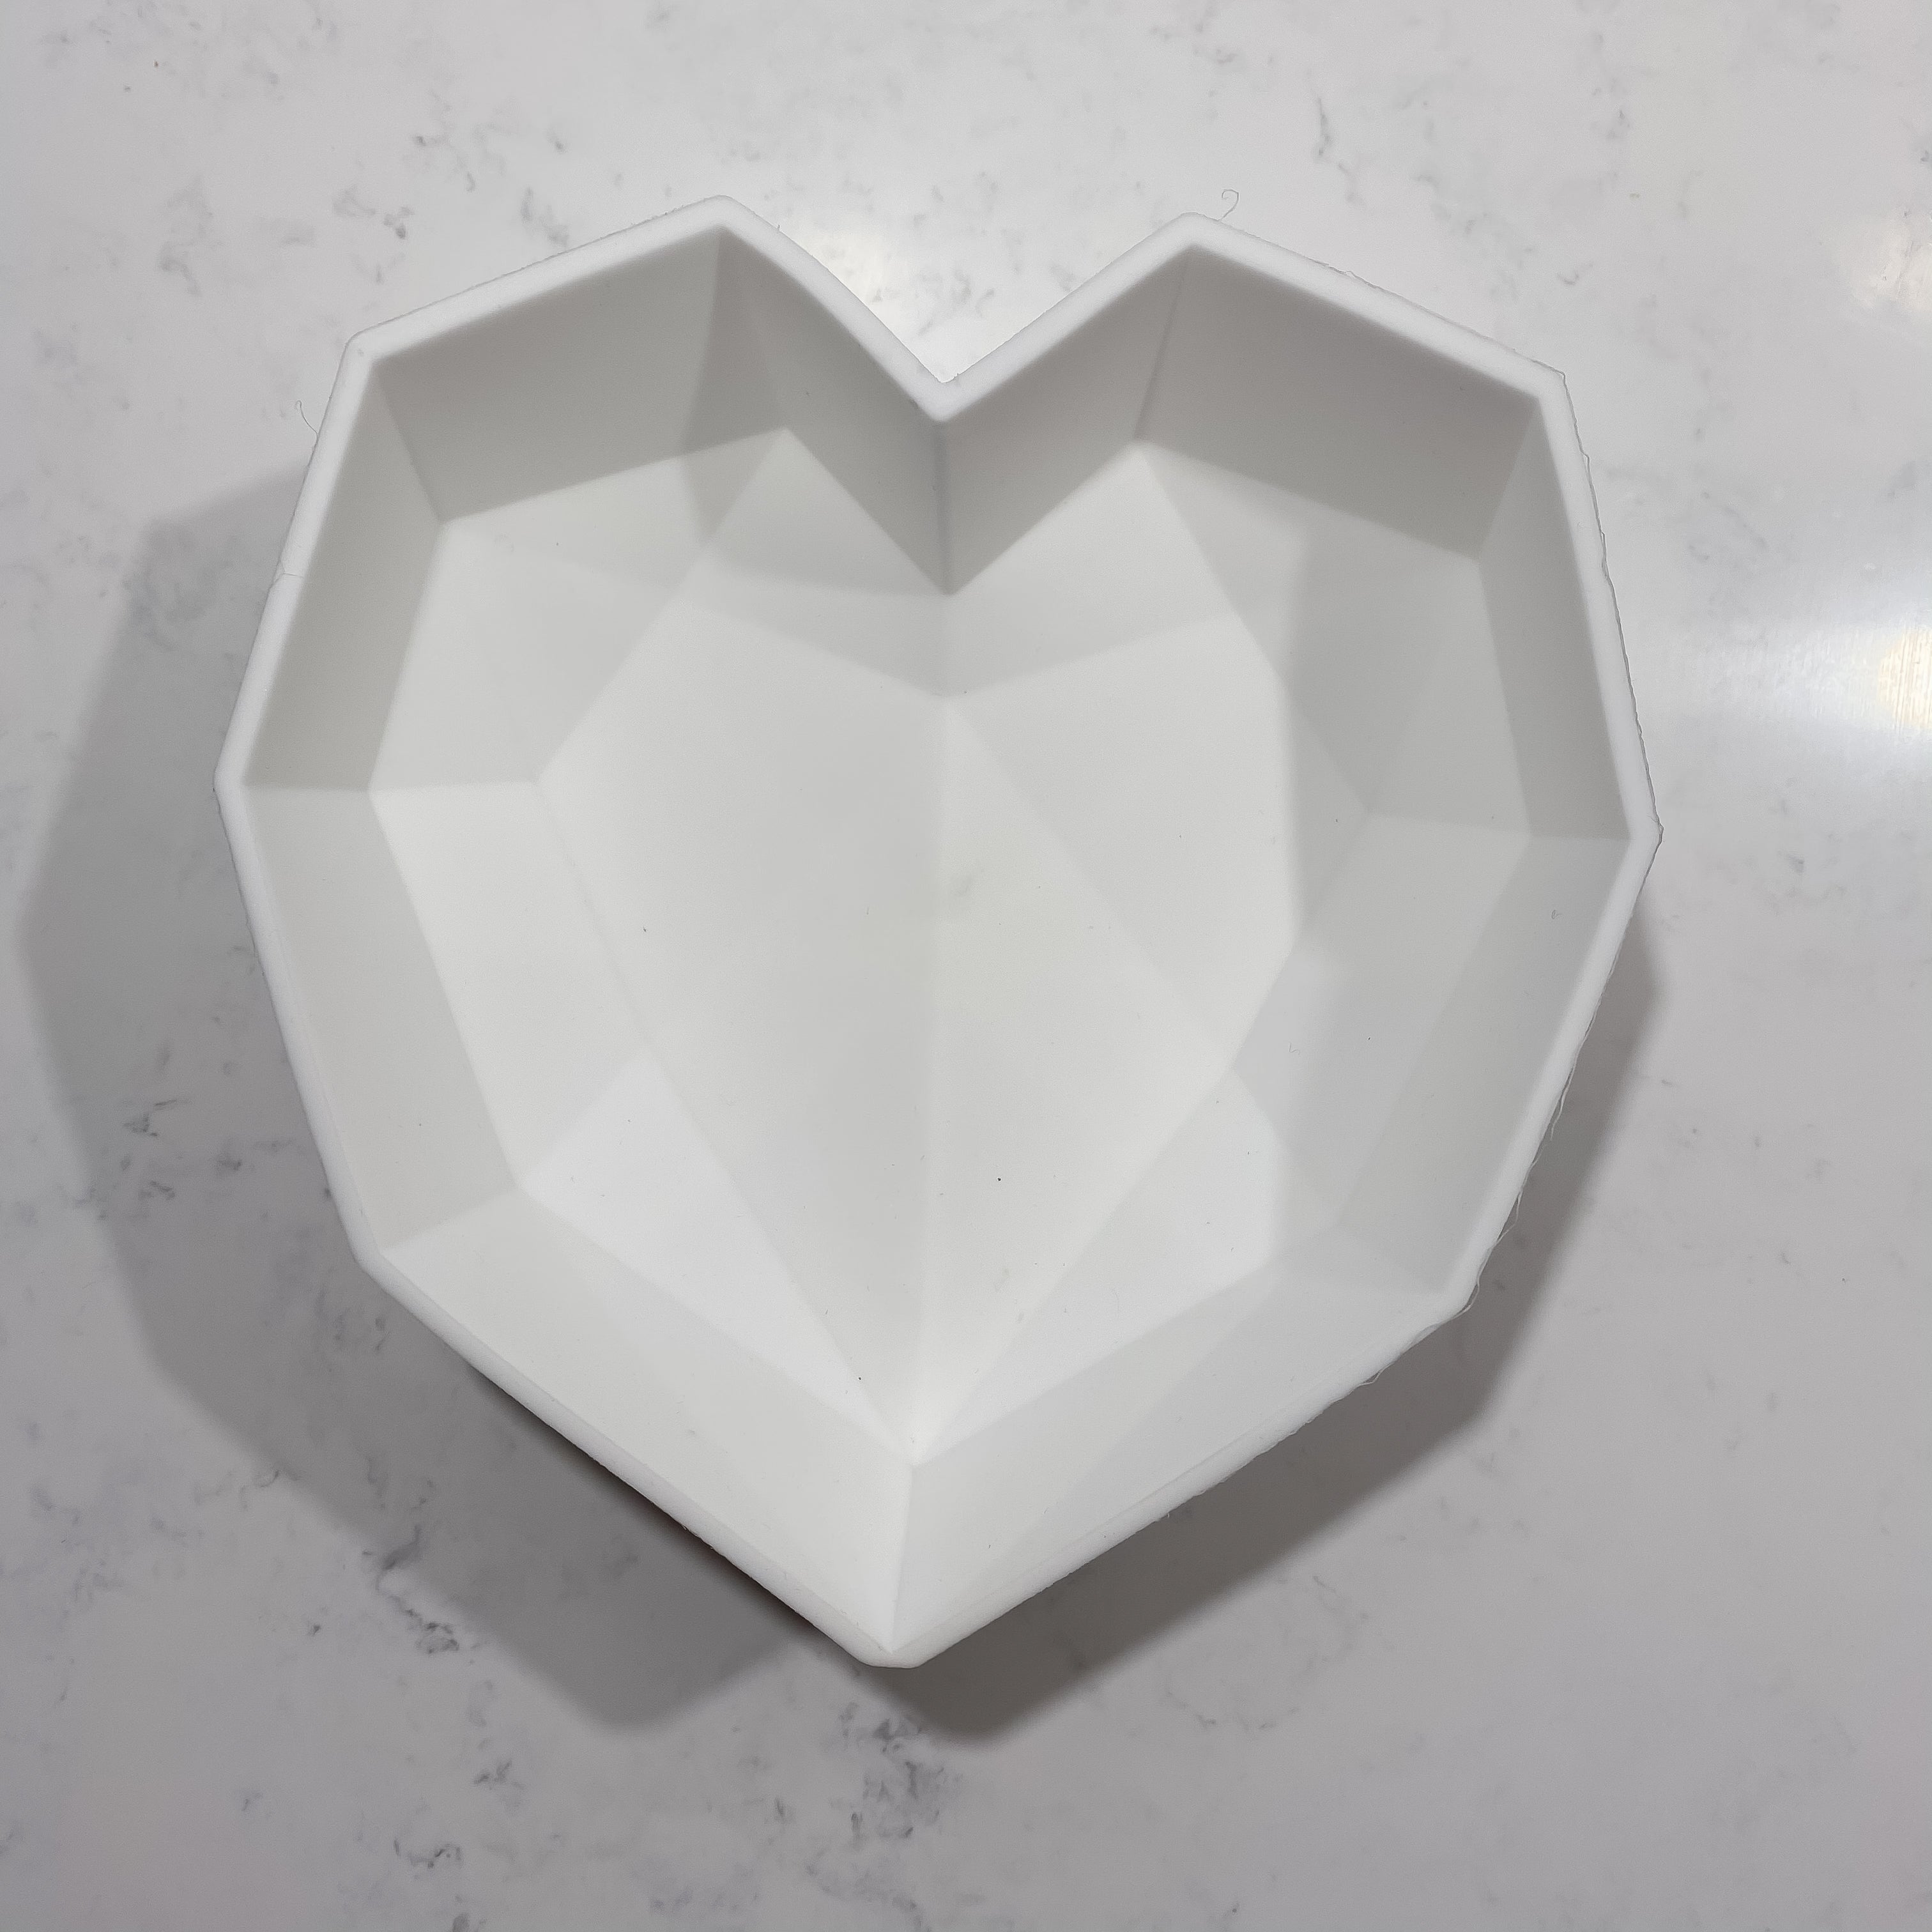 LARGE Geometric Heart Silicone Mould